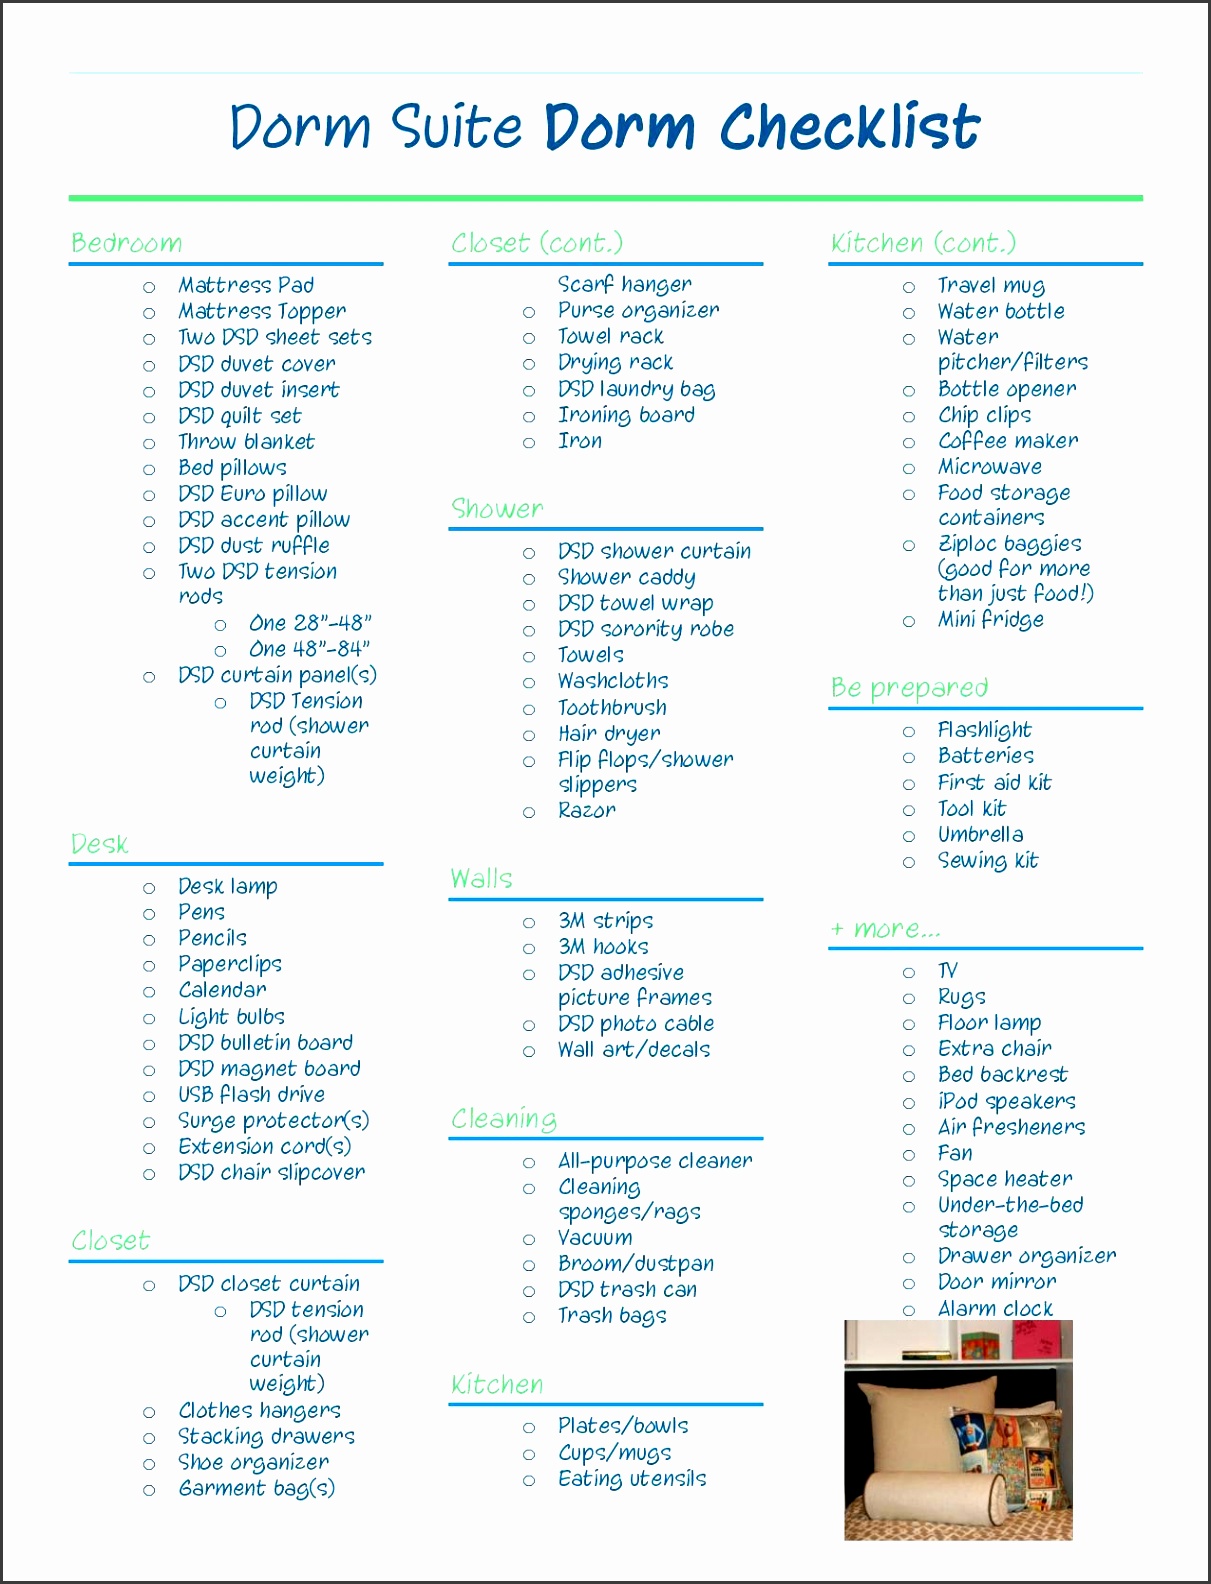 dorm suite dorm s dorm checklist is officially here dsd has a ton of the items you ll need to make your college dorm room all your own